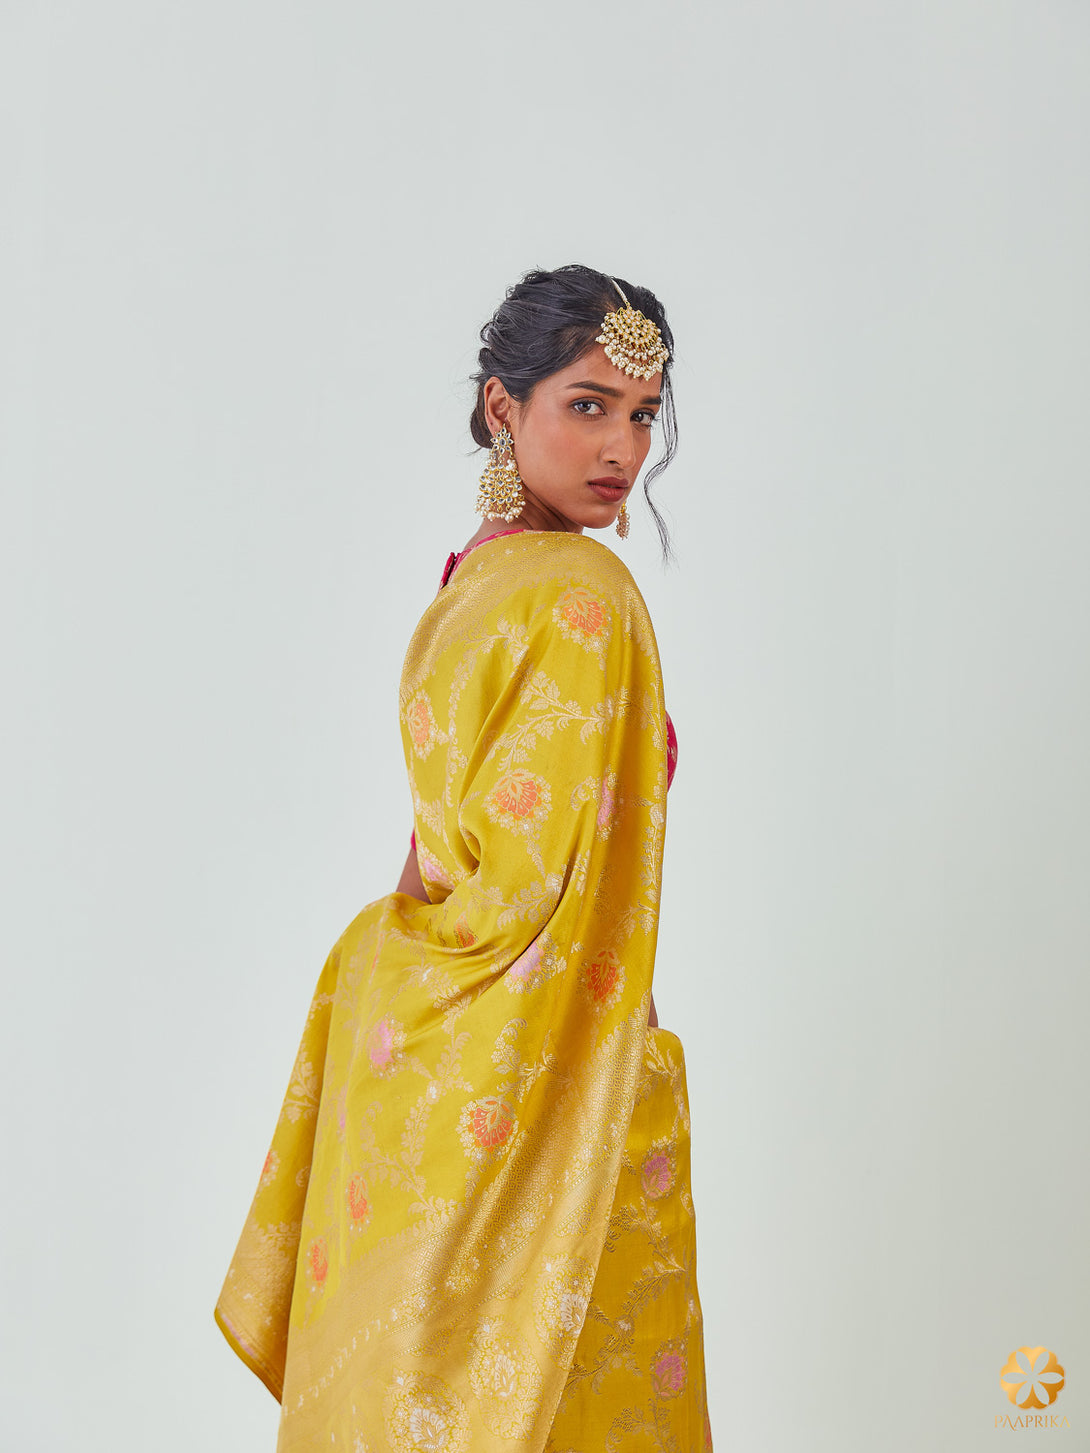 Stunning Handwoven Pastel Yellow Jaal Banarasi Saree - Grace and Sophistication in Every Thread.